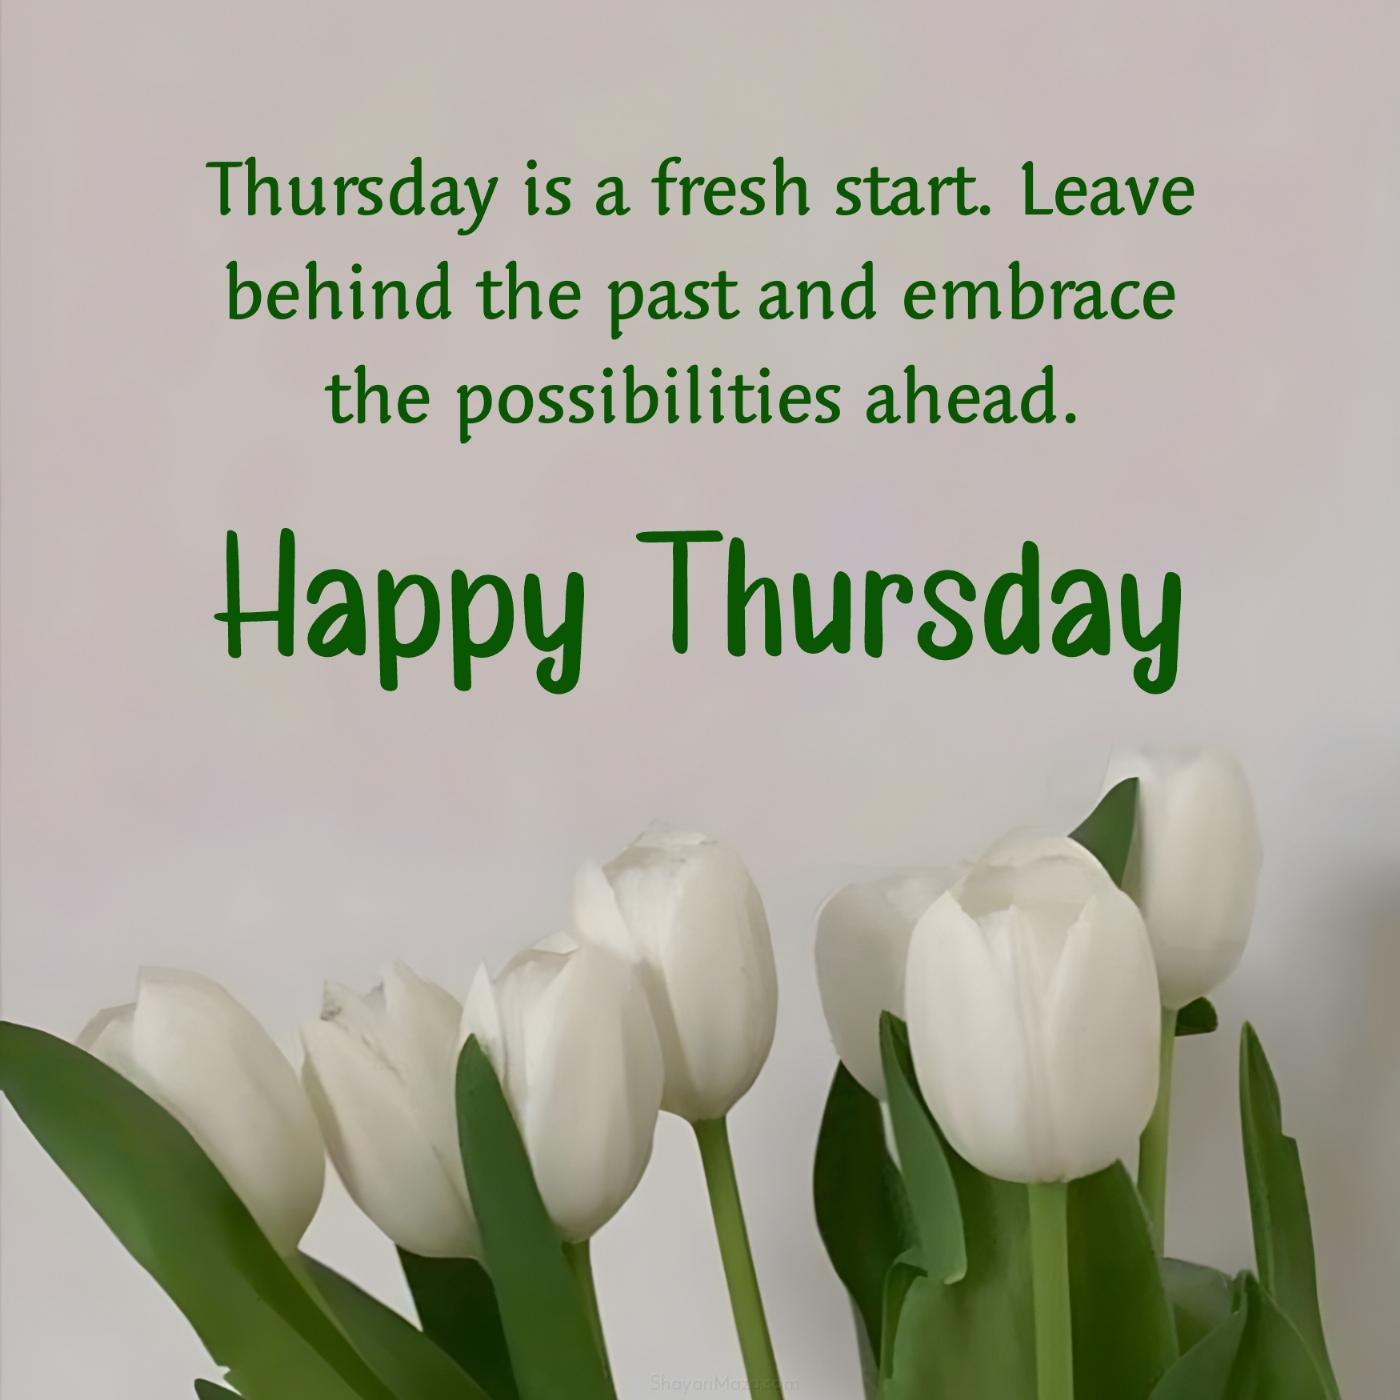 Thursday is a fresh start Leave behind the past